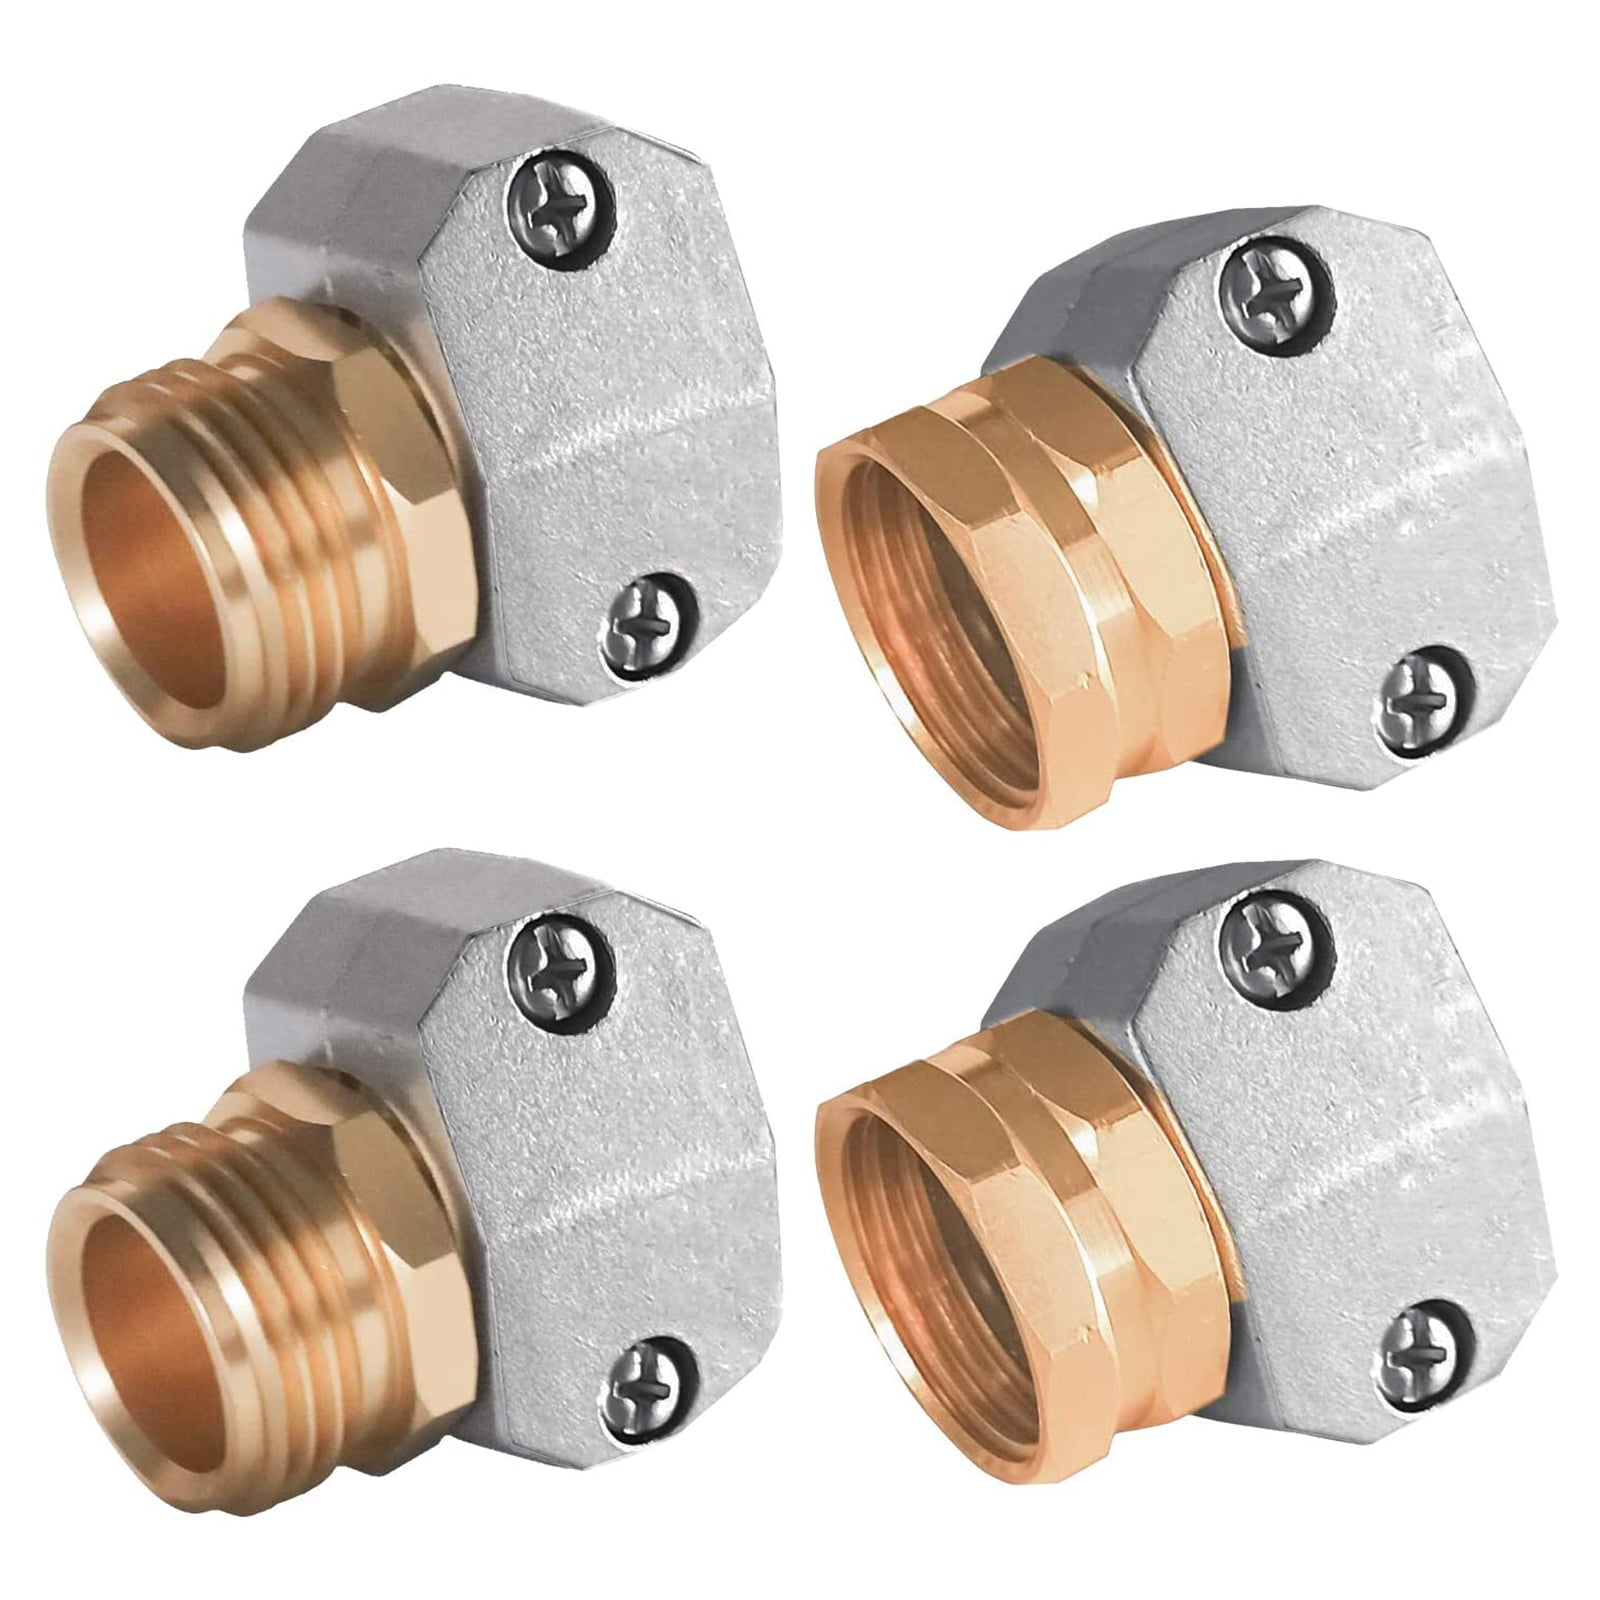 Details about   3/4" Brass Garden Water Hose Connector Repair Mender Kit Ends Fittings Clamp 